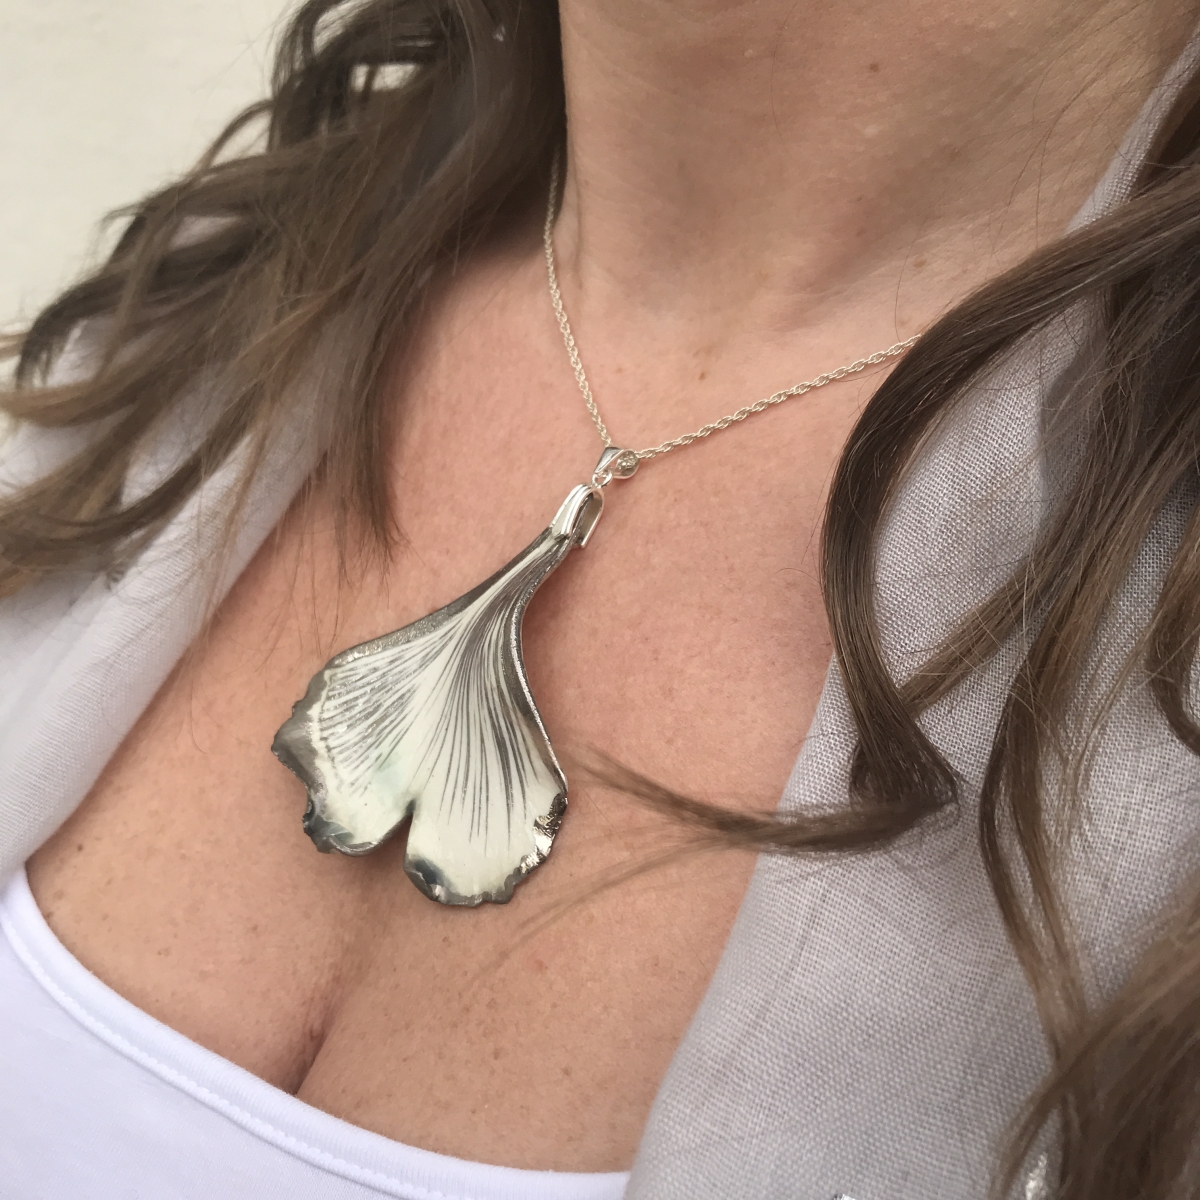 Ginkgo Leaf Pendant with Platinum Edges and Texture by Sonya Ceramic Art